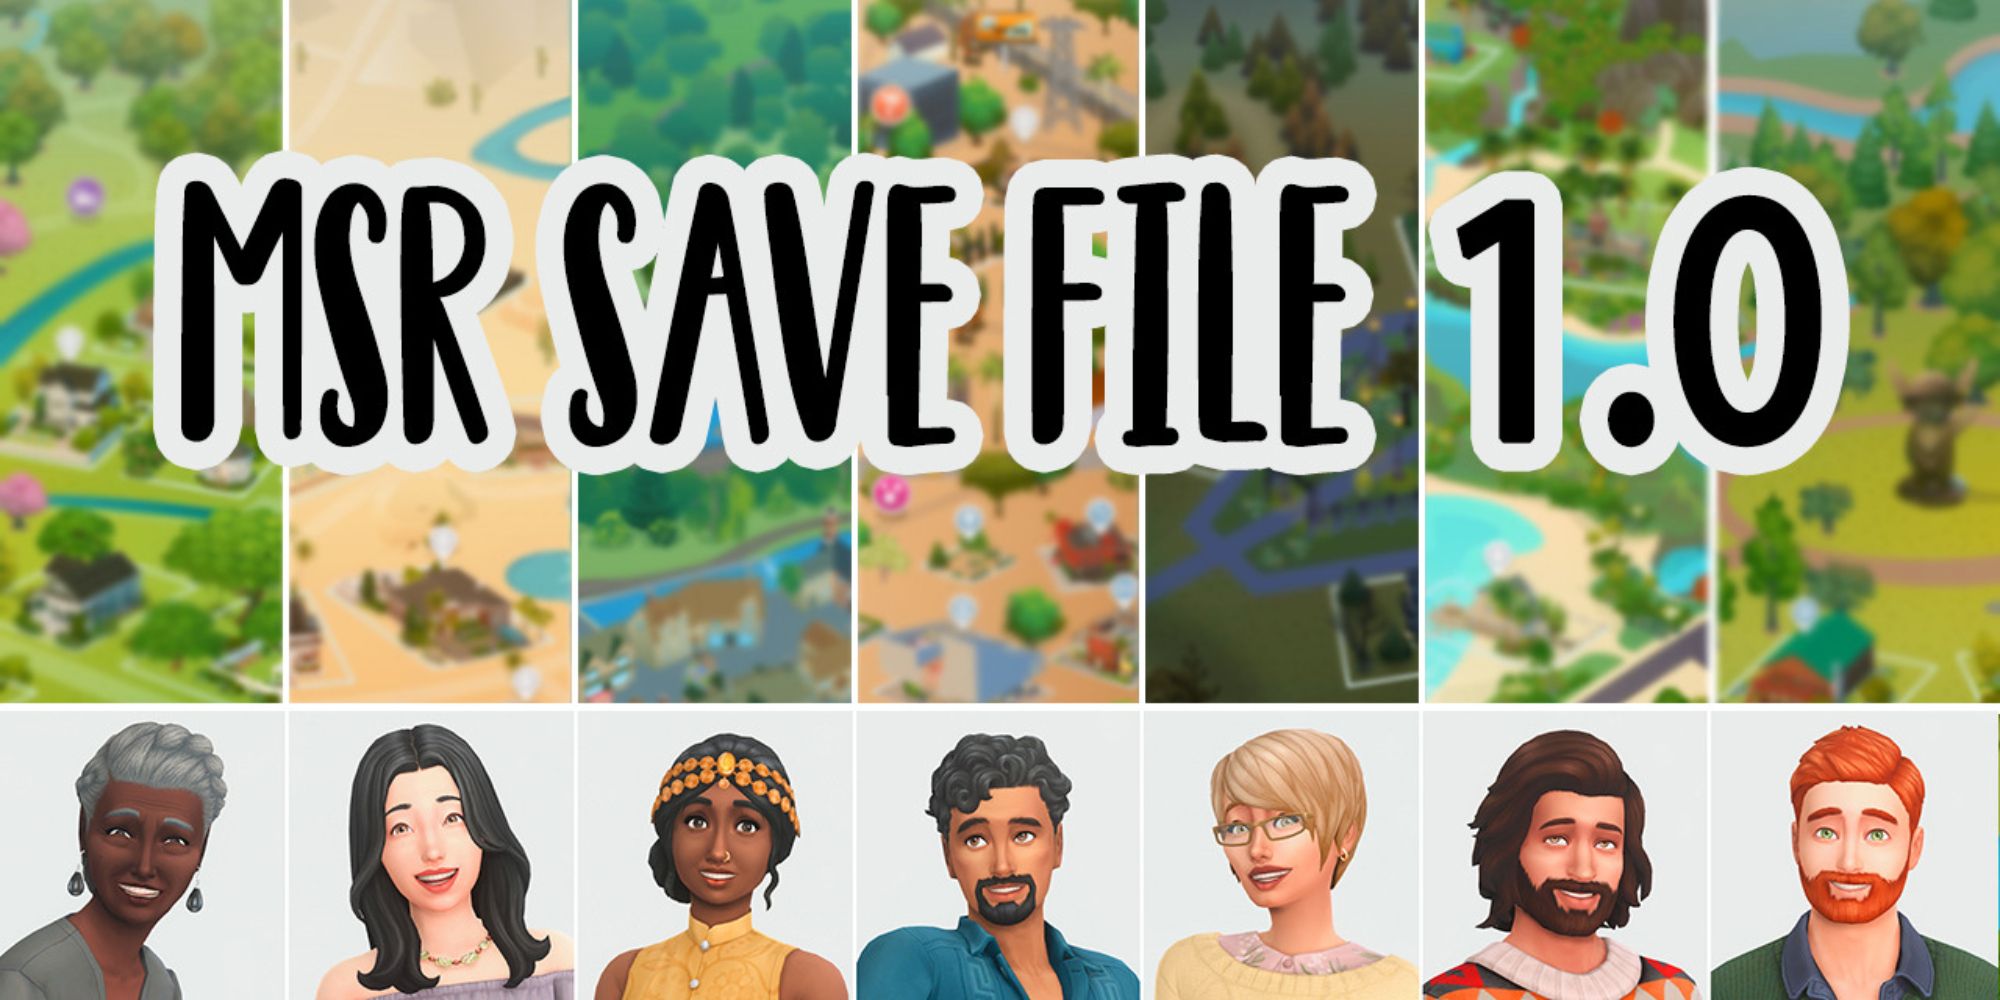 A collage of Sims and different worlds in MSR Save File 1.0 for The Sims 4